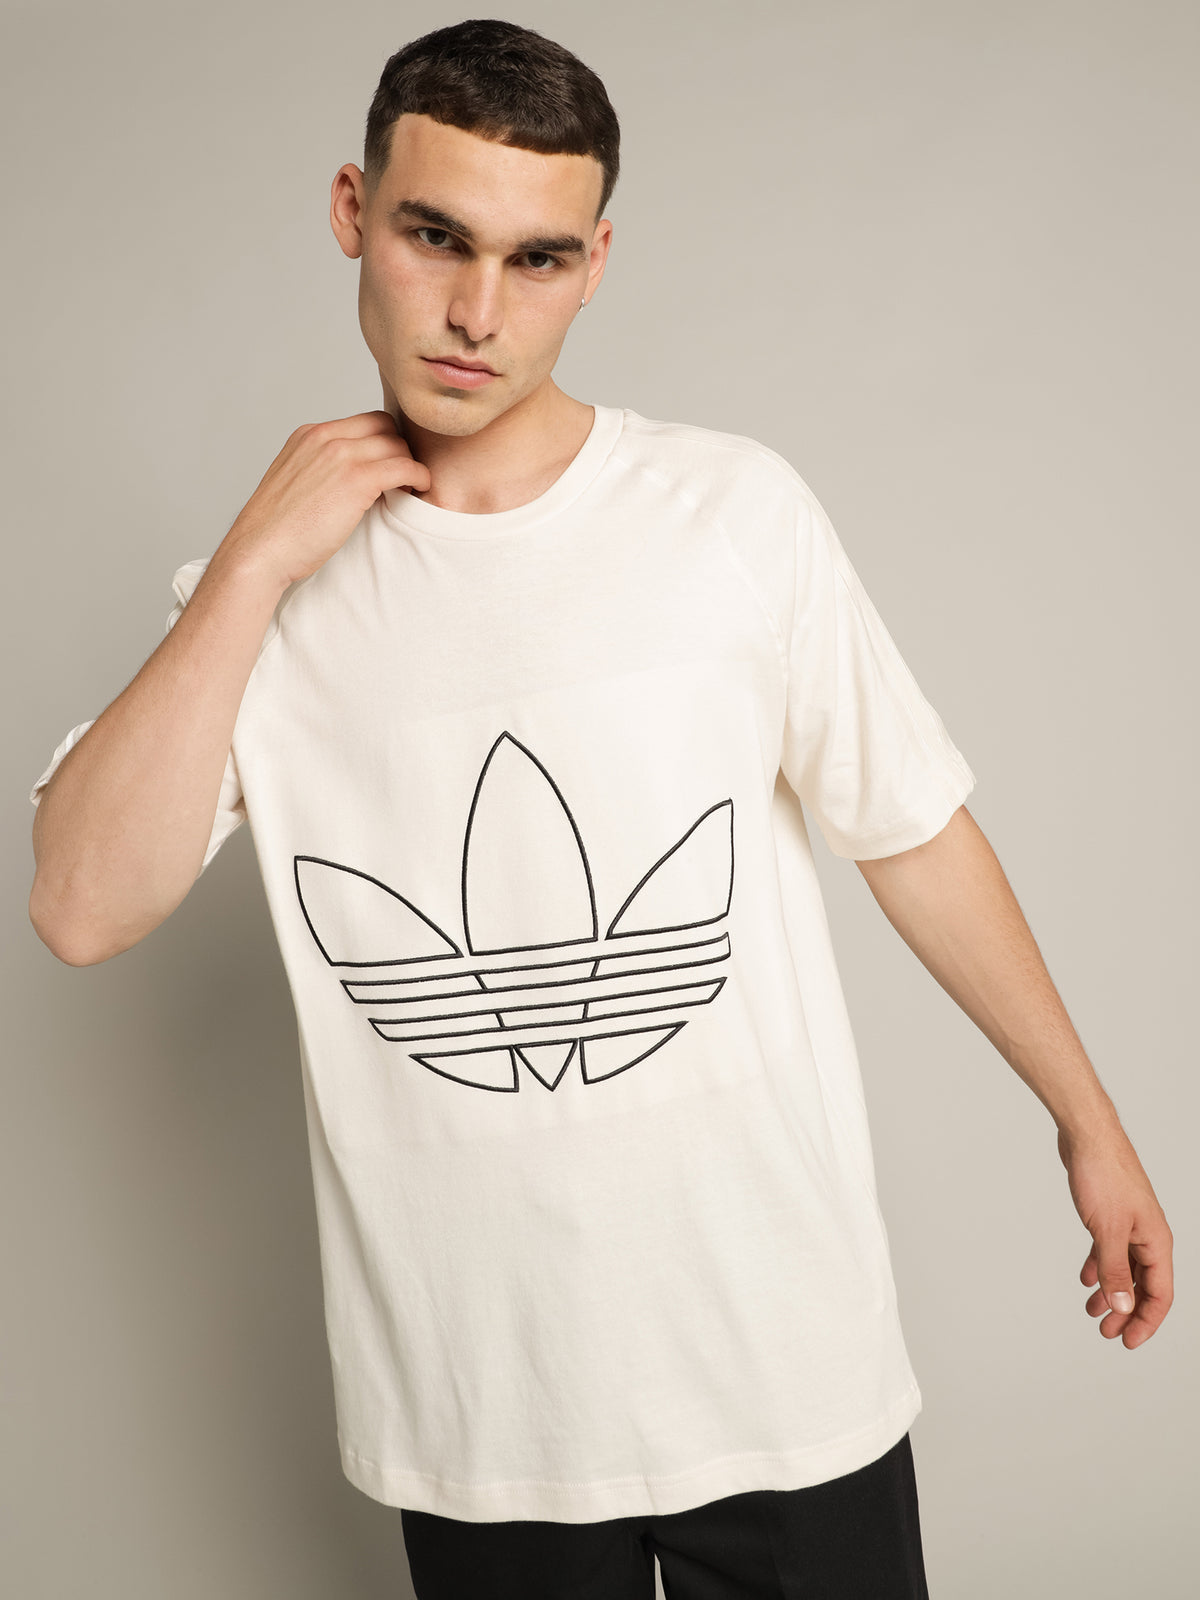 Graphics Tricolor T-Shirt in Wonder White